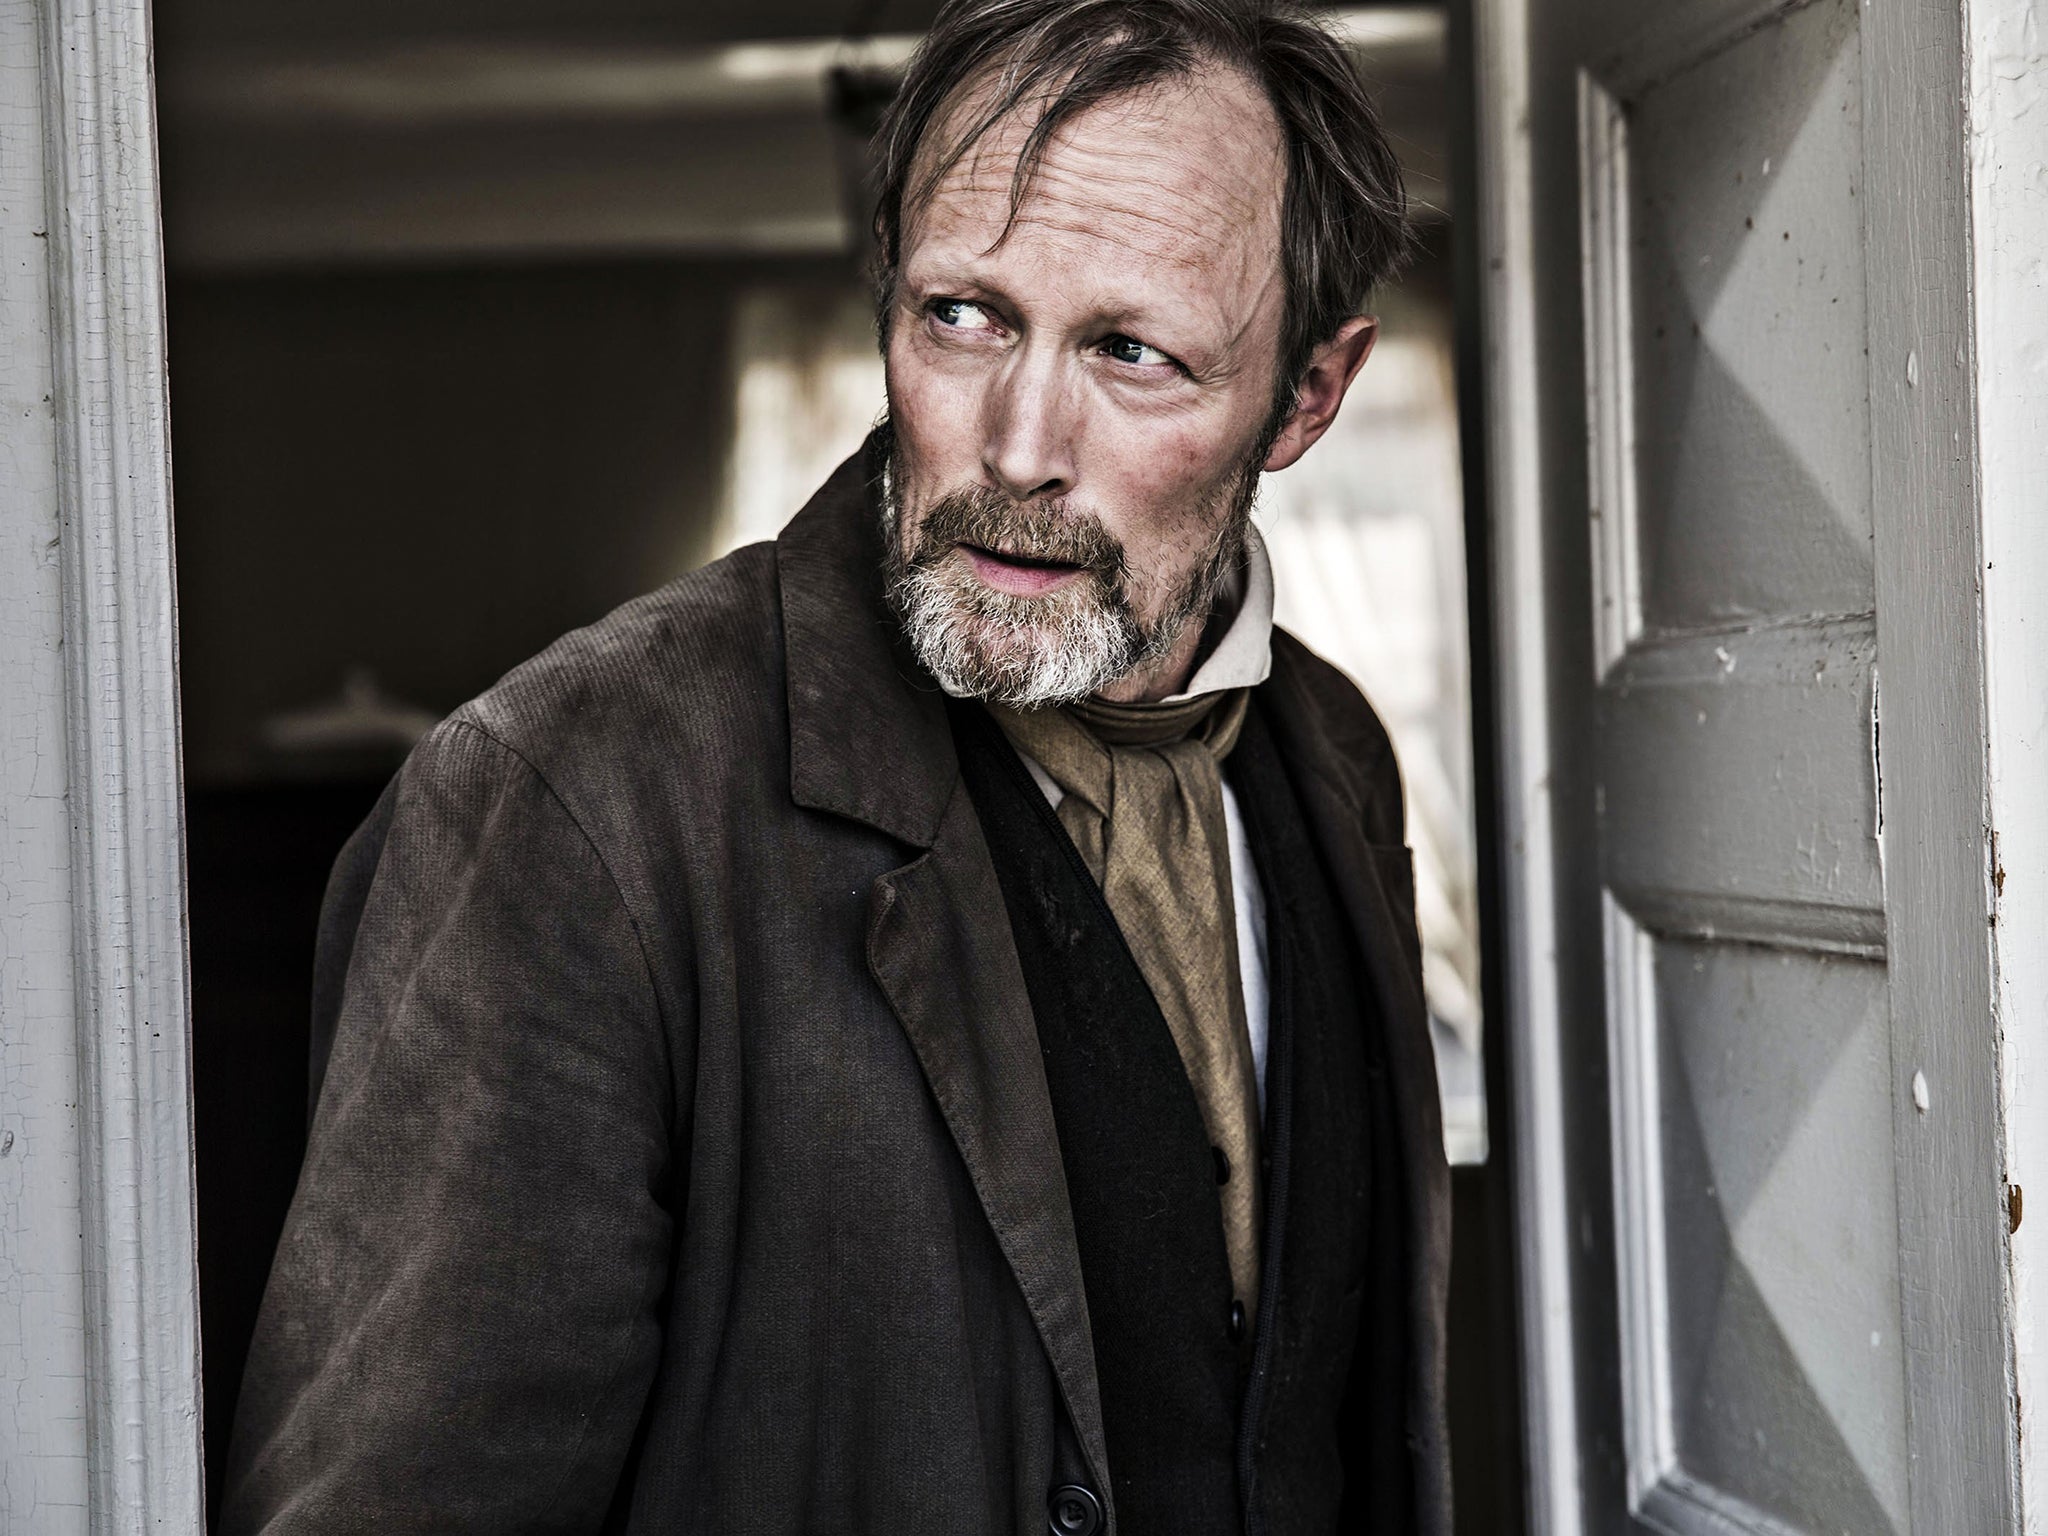 War veteran and father of Peter and Laust Thoger Jensen played by Lars Mikkelson